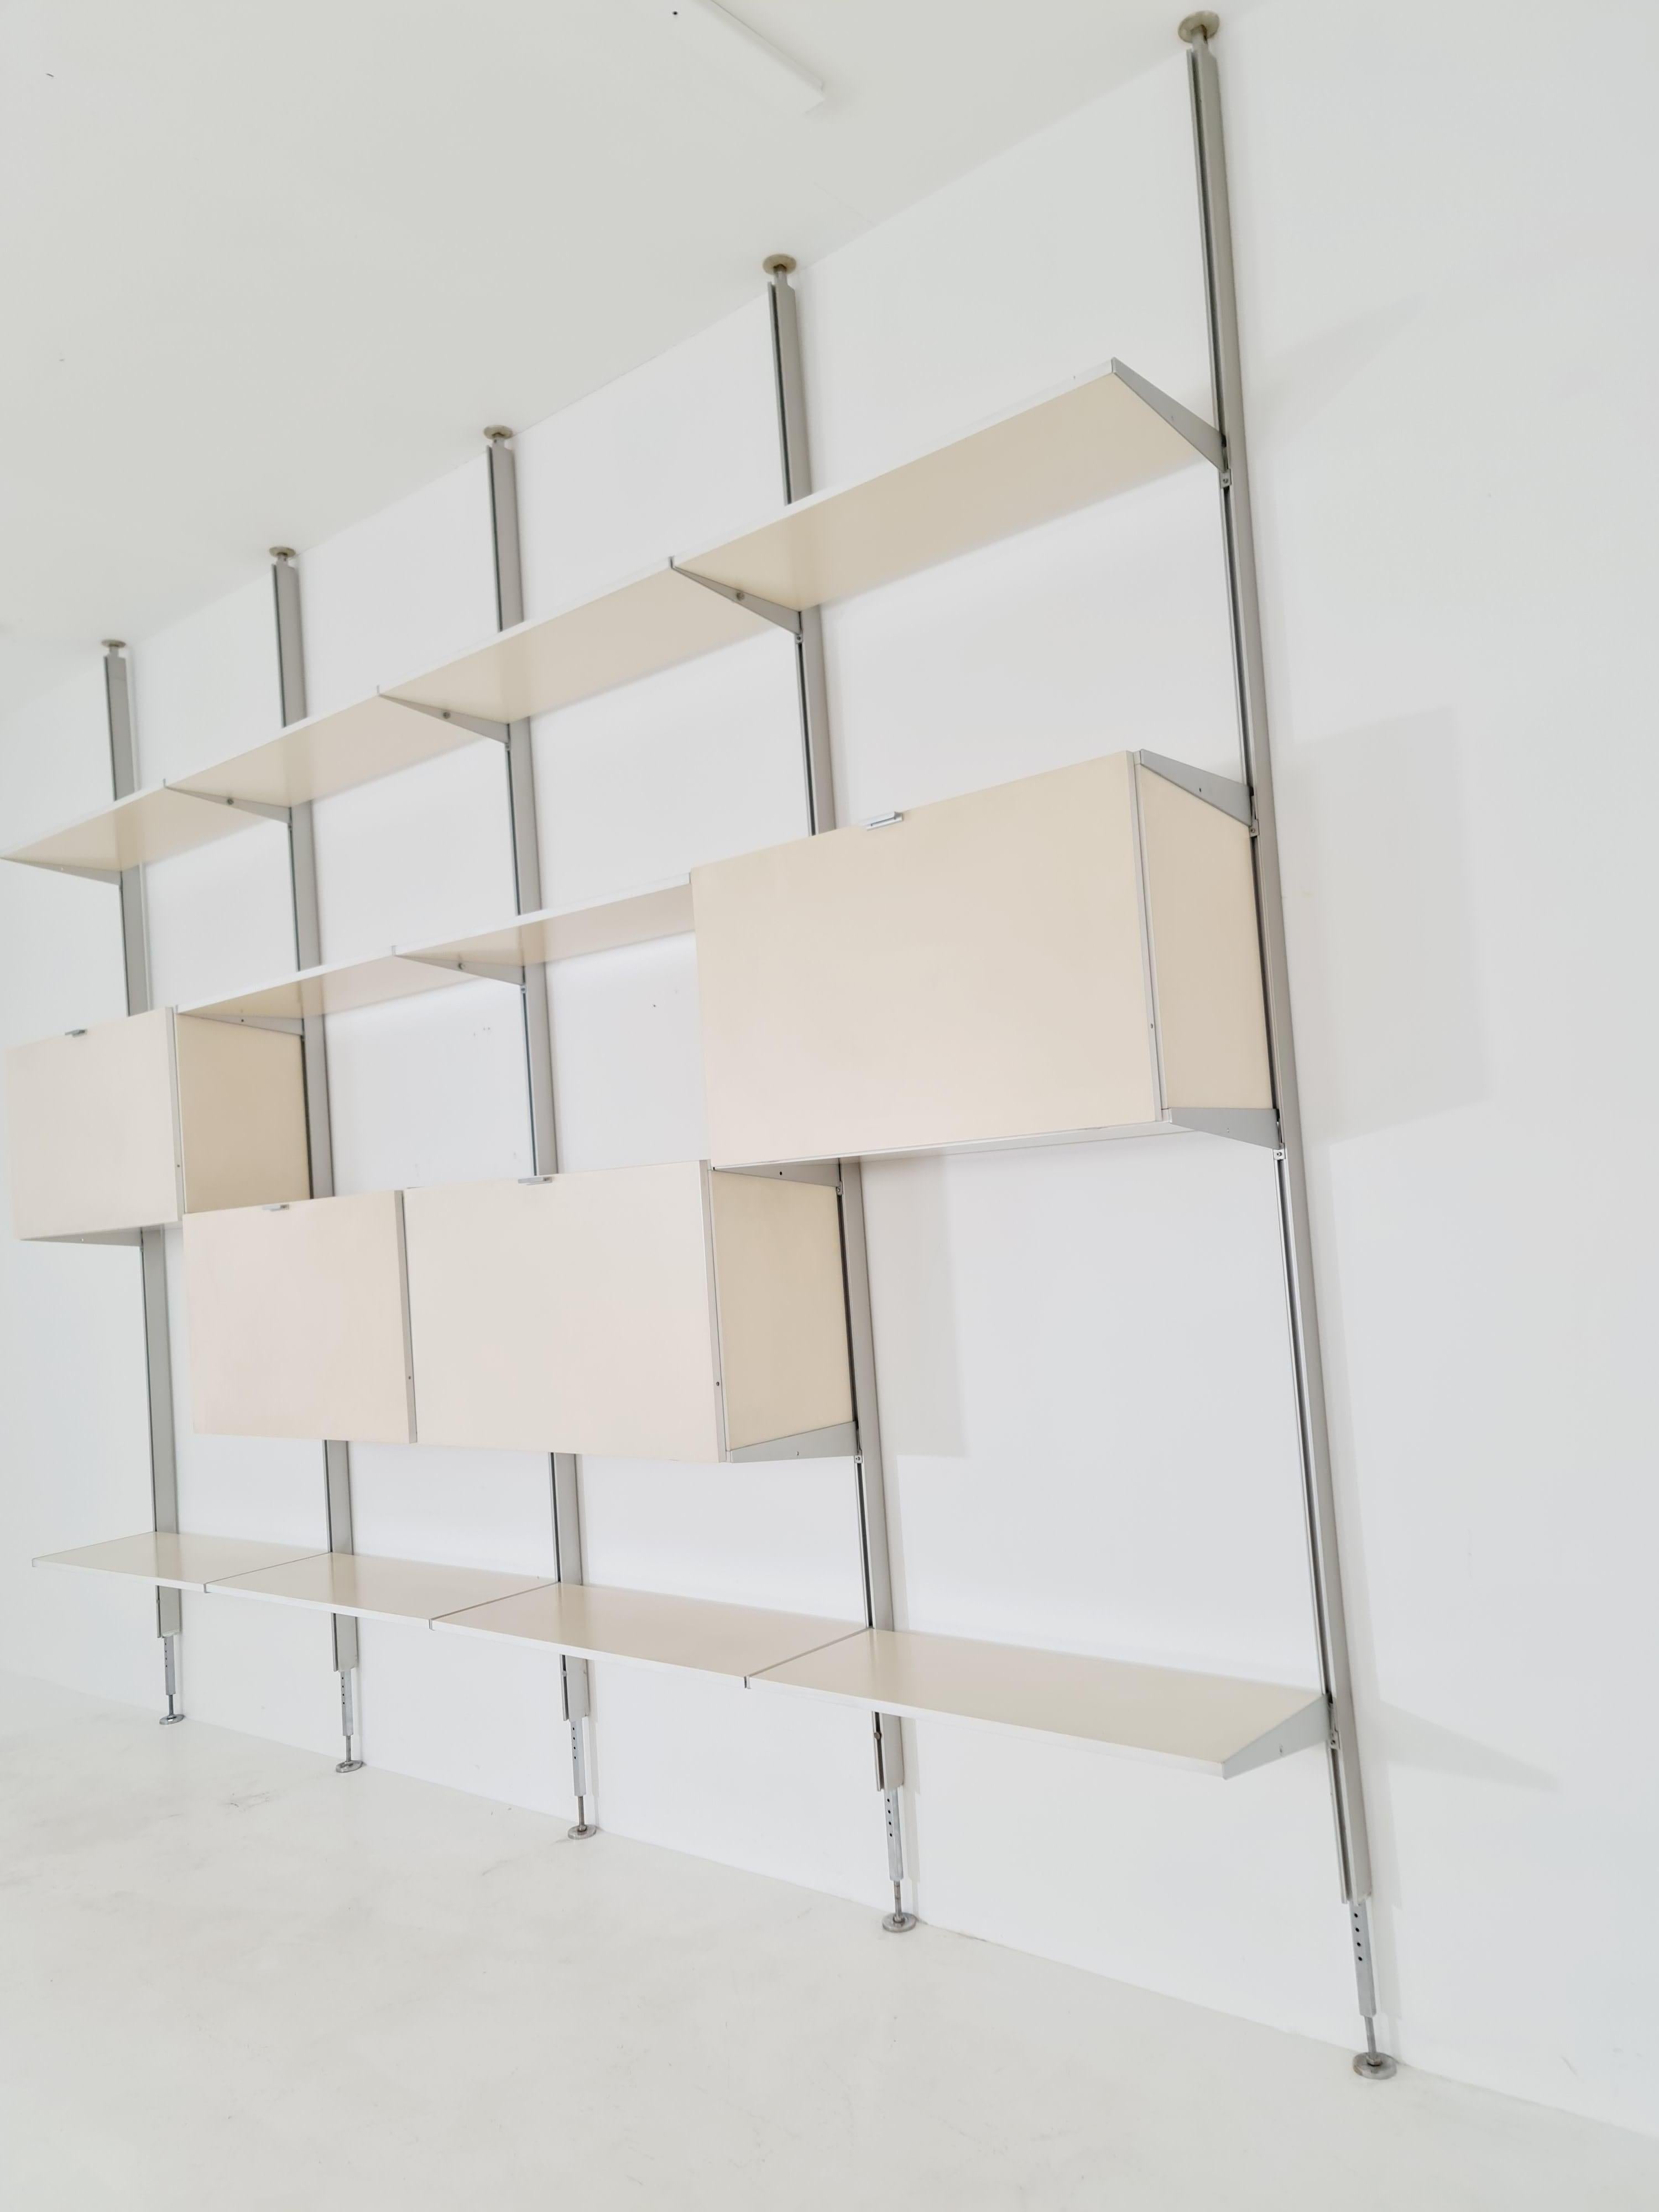 Rare Free Standing Modular George Nelson Wall Unit Bookcase, Herman Miller Inter In Excellent Condition For Sale In Gaggenau, DE